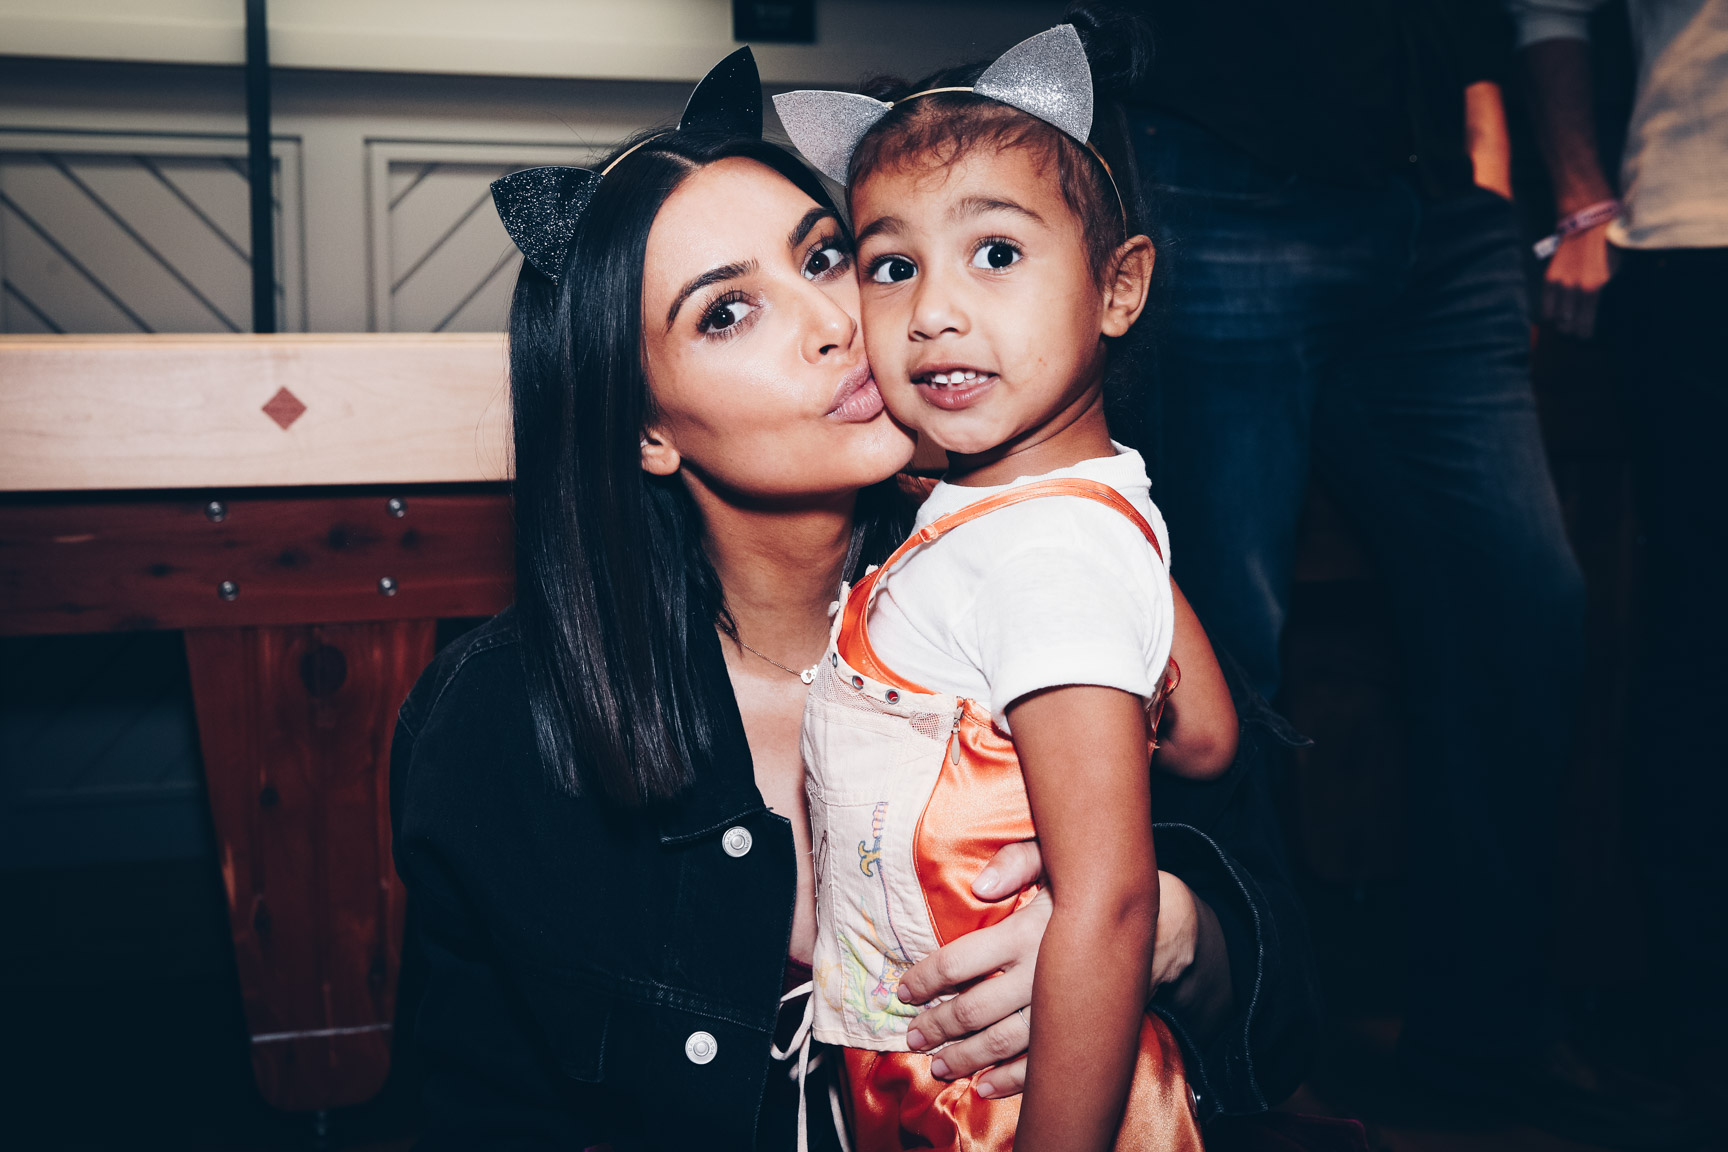 Kim Kardashian West kiss the eldest of her kids, North West, on the cheek at an Ariana Grande concert